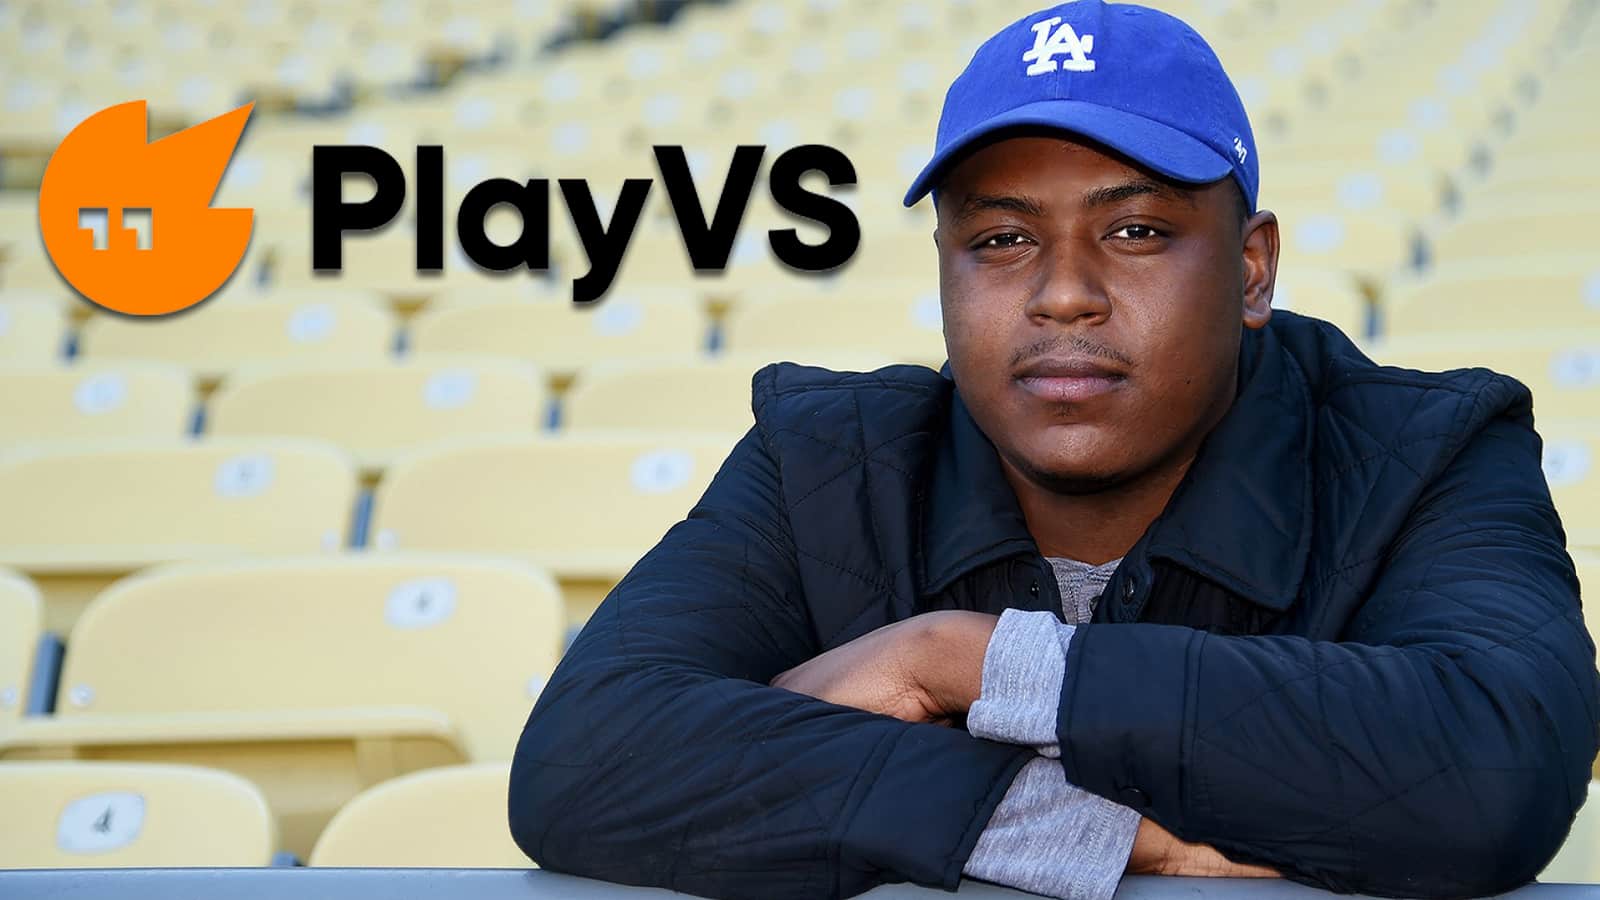 Delane Parnell, founder of PlayVS with an LA Dodgers hat on and company logo behind him